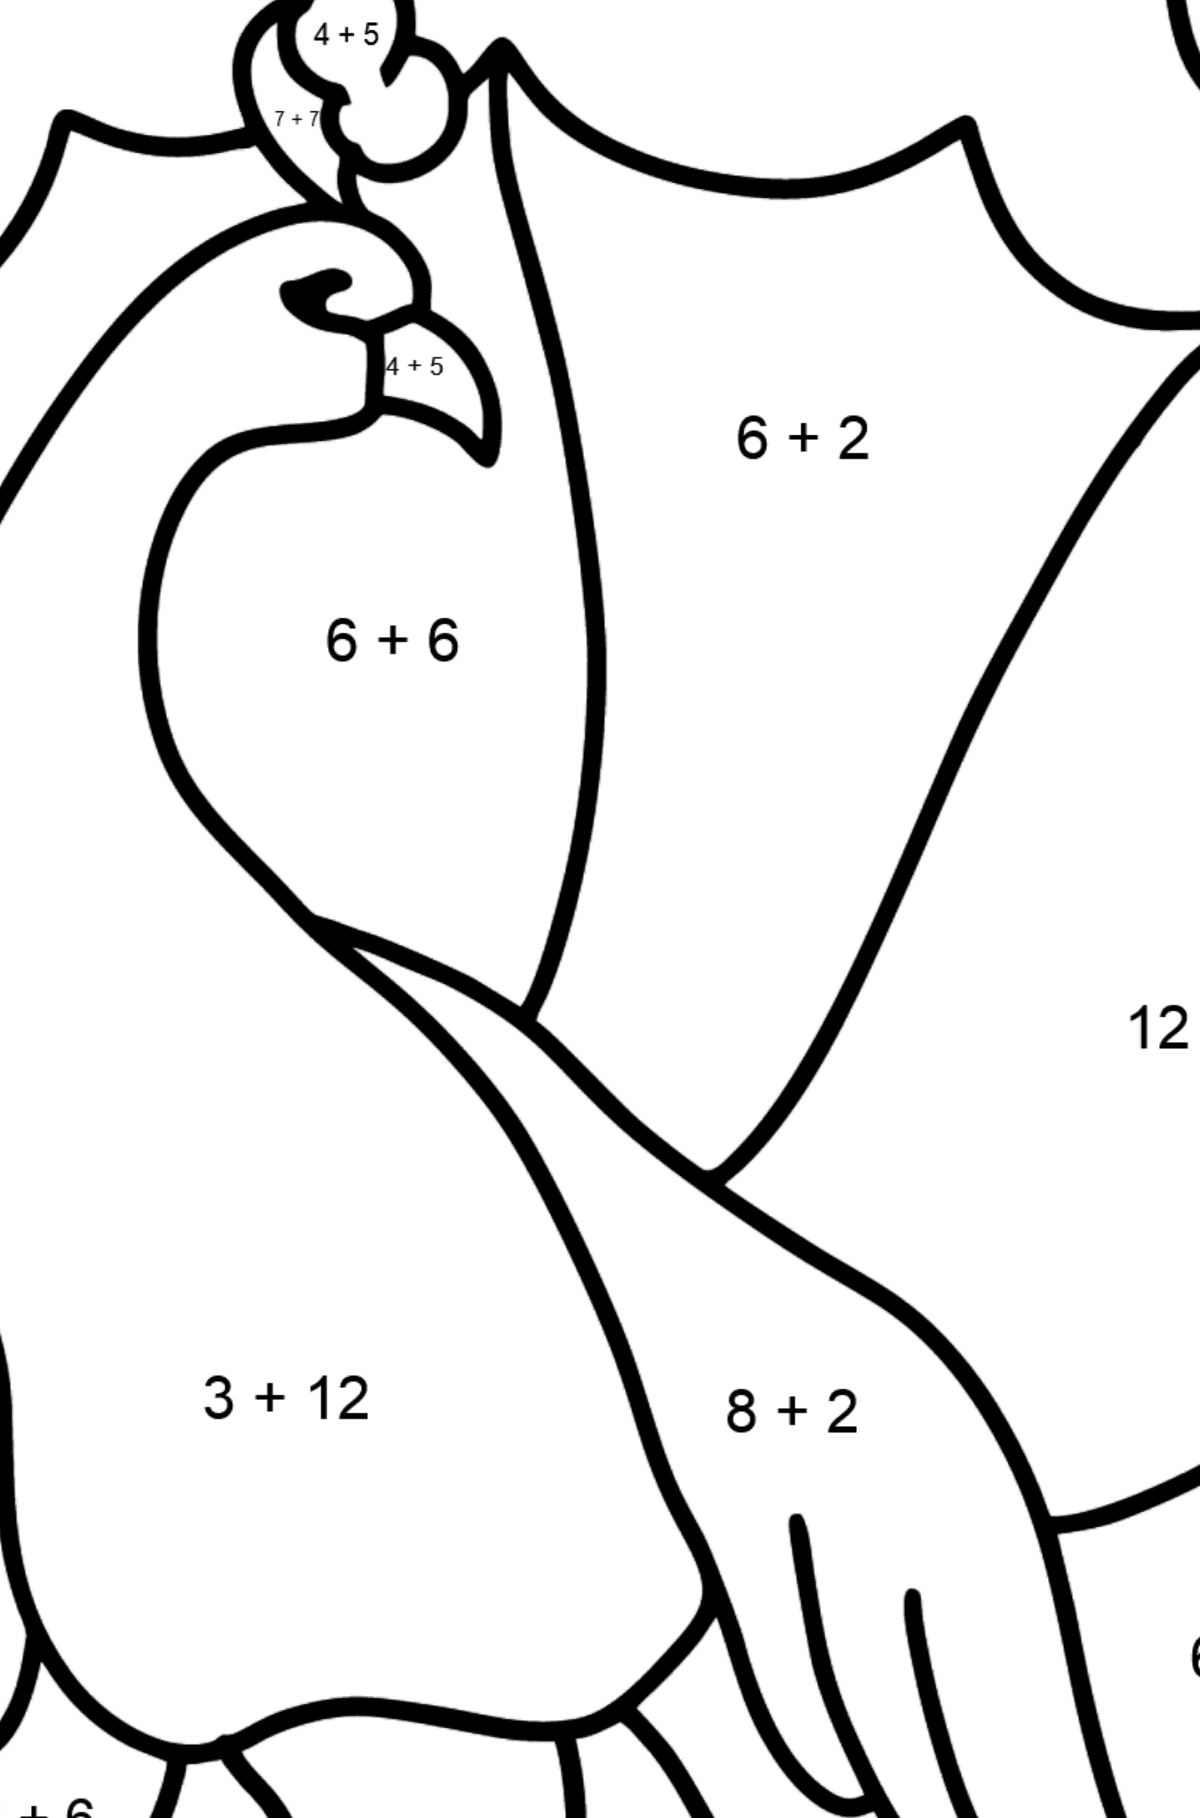 Peacock coloring page - Math Coloring - Addition for Kids